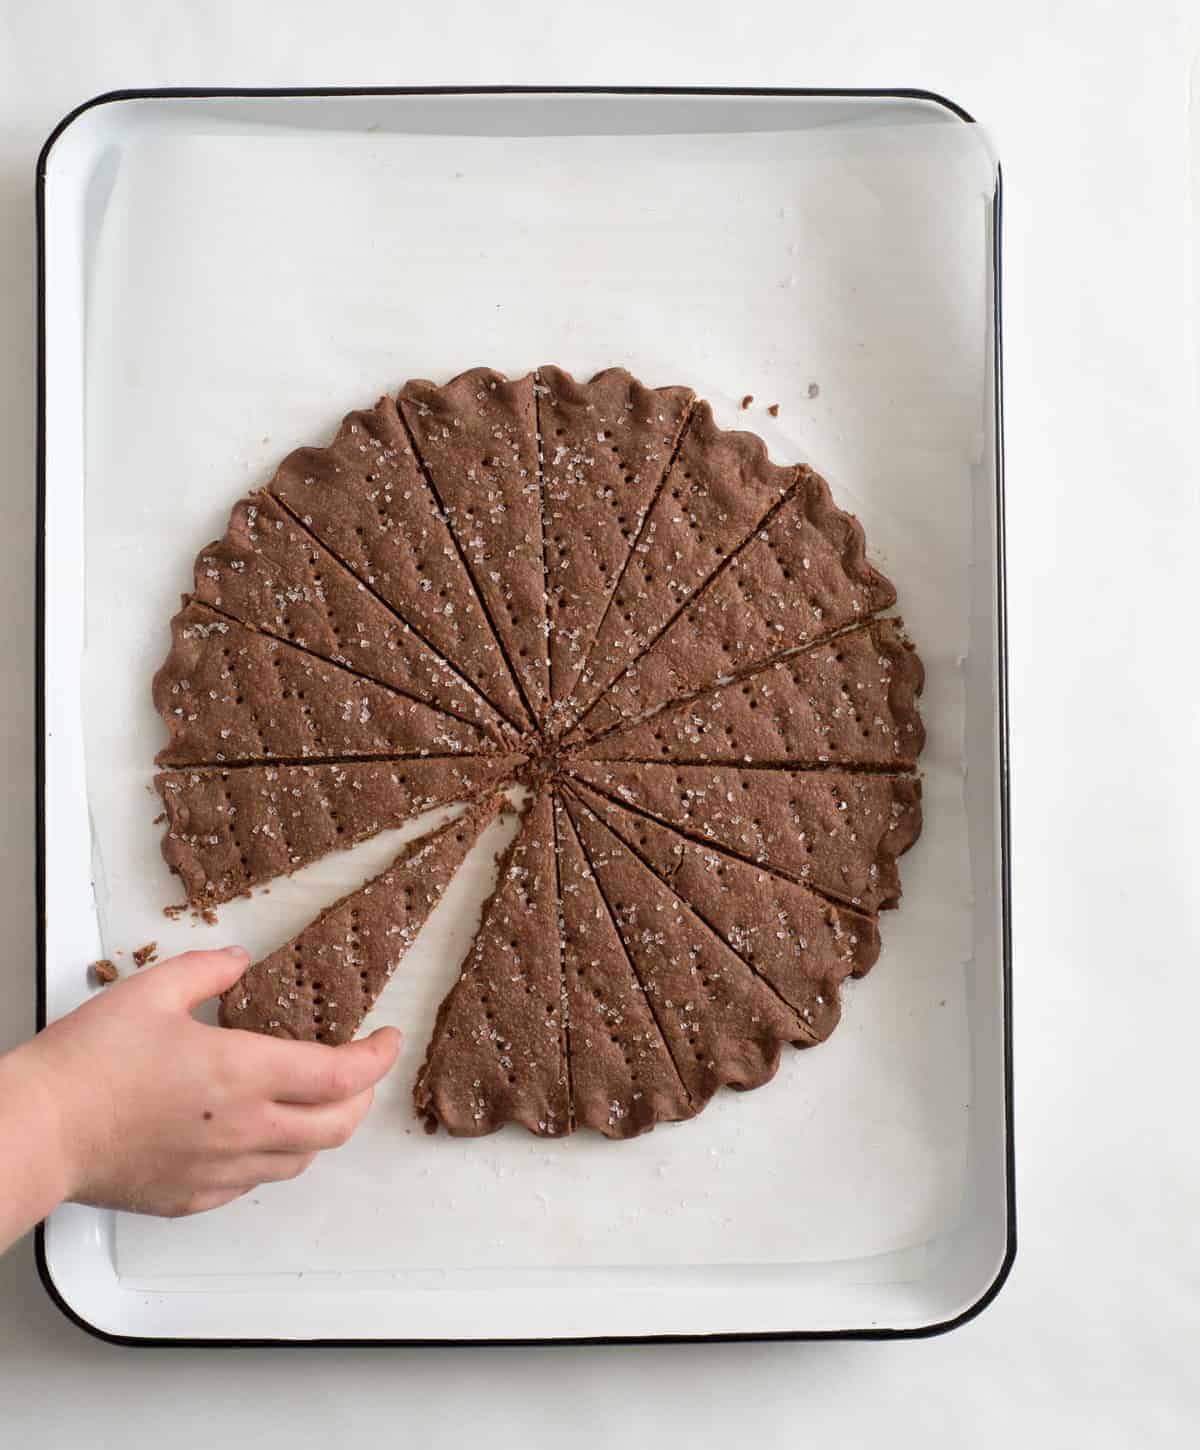 https://www.blessthismessplease.com/wp-content/uploads/2018/02/chocolate-shortbread-cookies-3.jpg